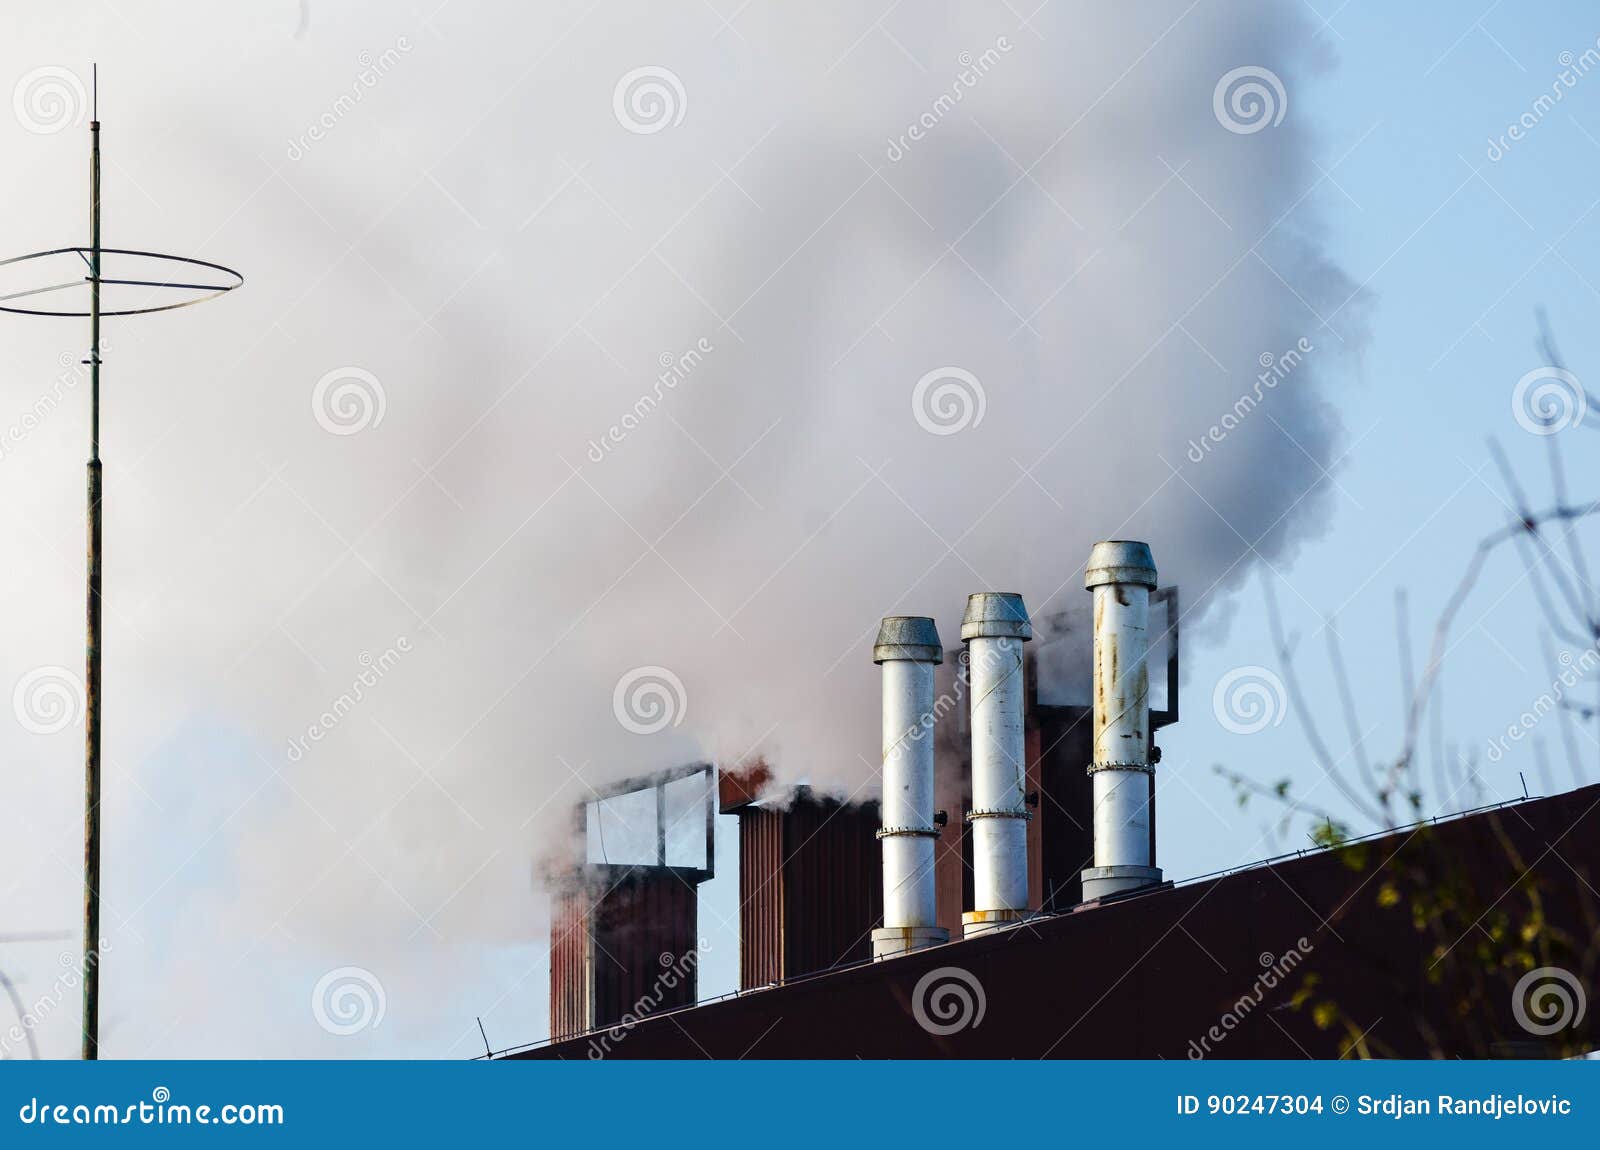 multiple coal fossil fuel power plant smokestacks emit carbon dioxide pollution.